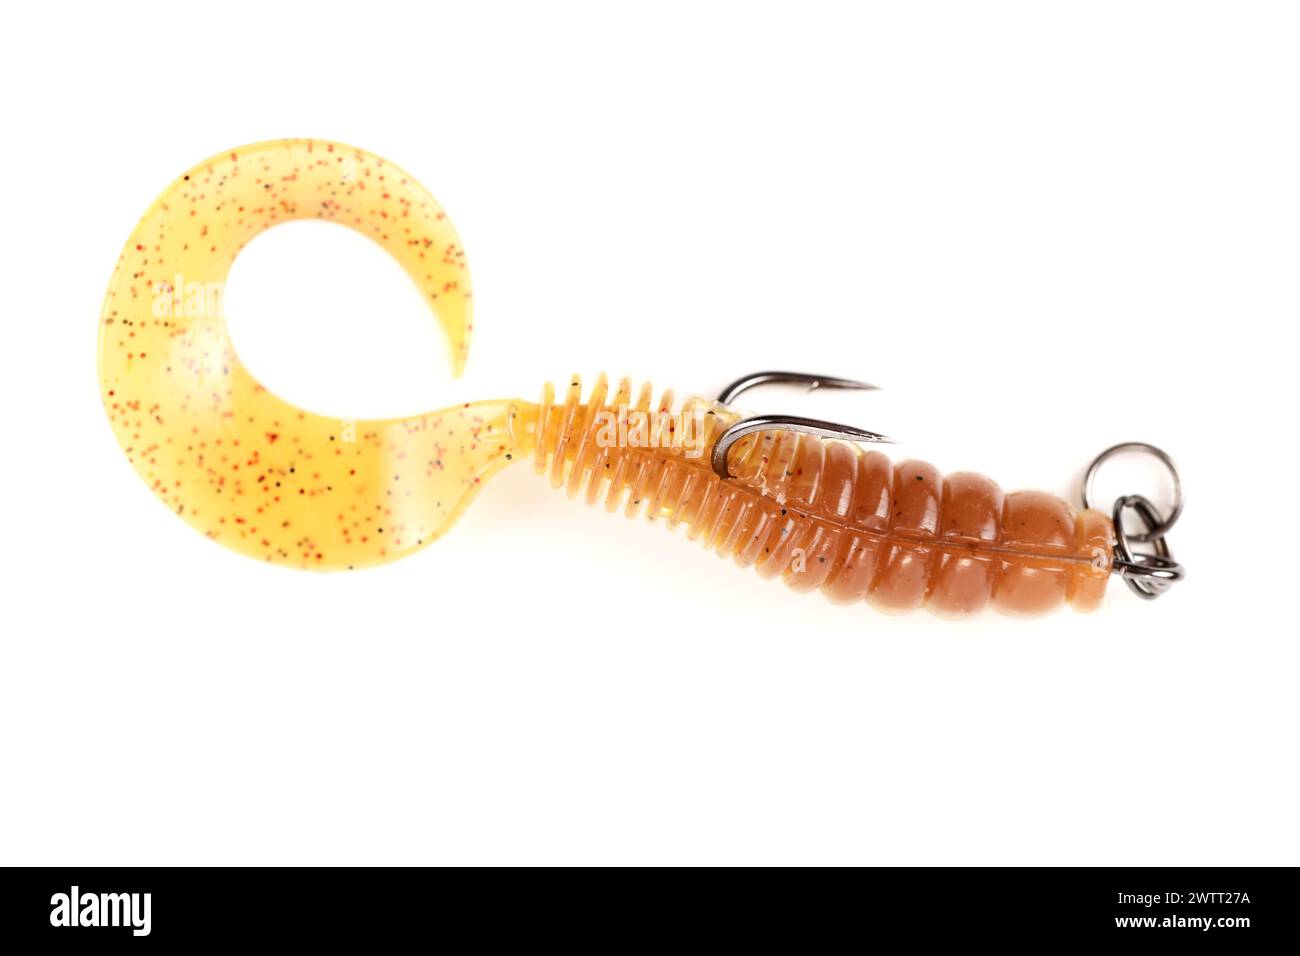 Yellow silicone grub, fishing lure with double hook, isolated on white background Stock Photo